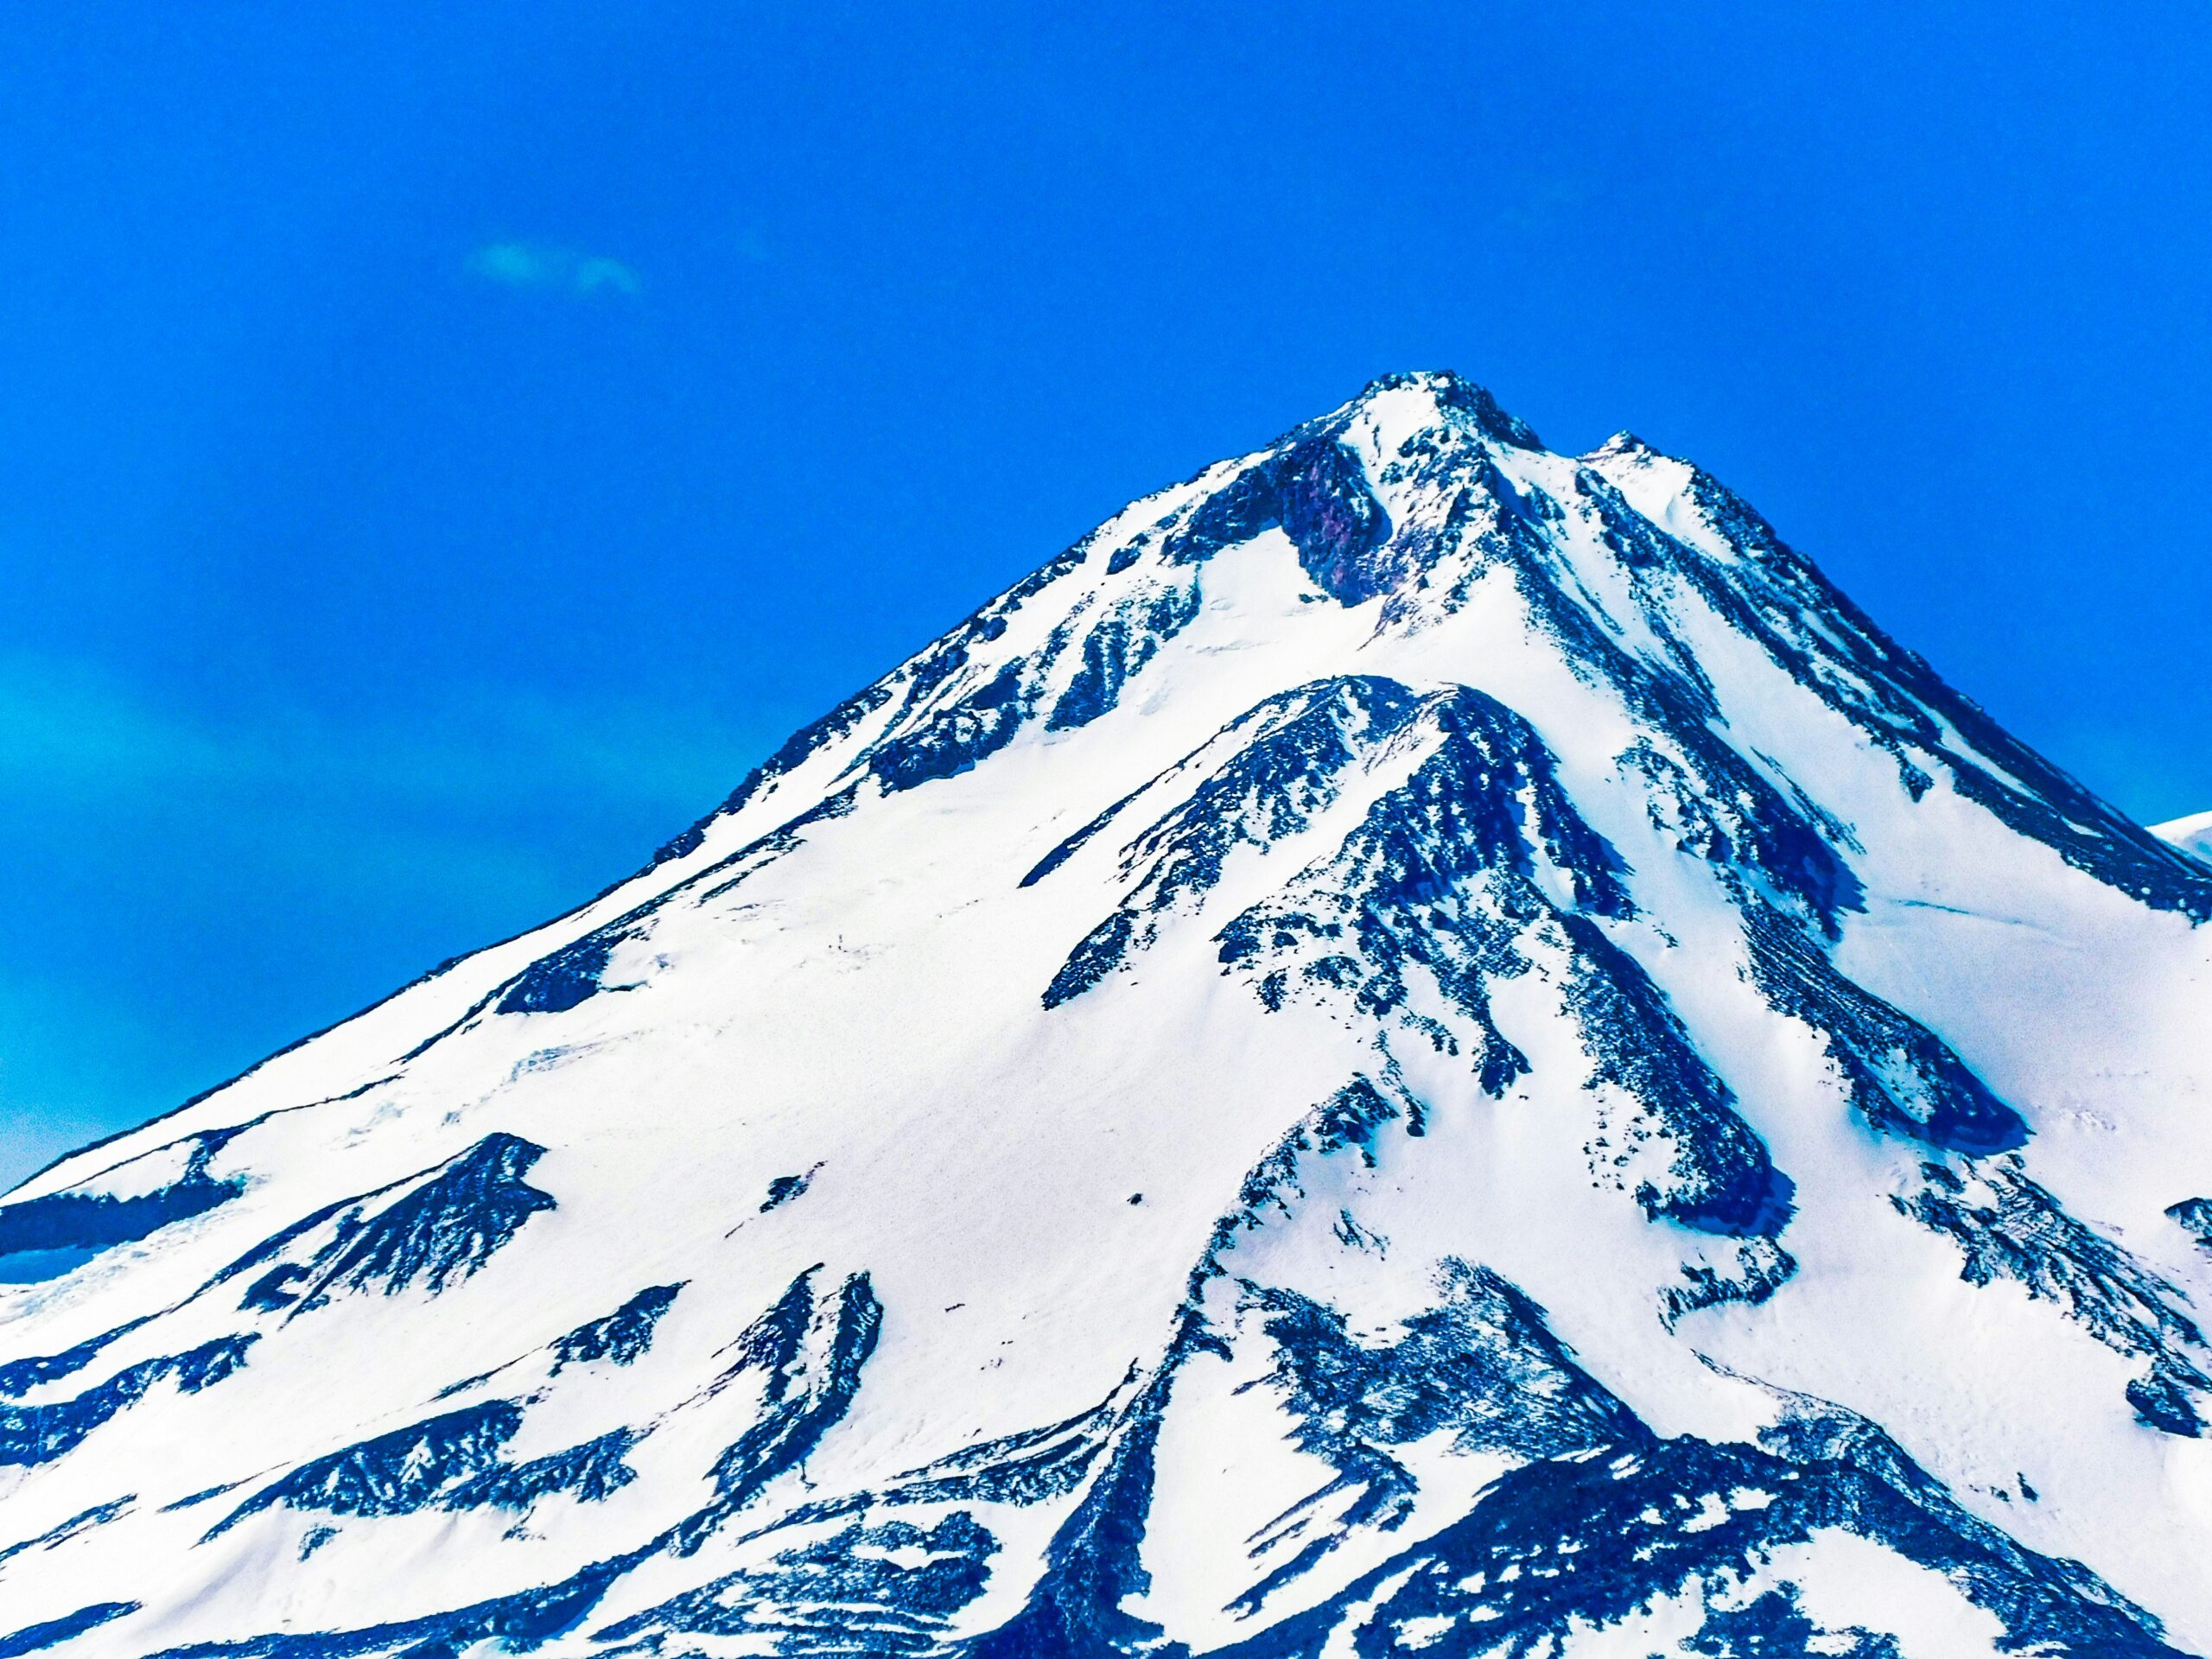 Is There A Risk Of Altitude Sickness On Mount Shasta?